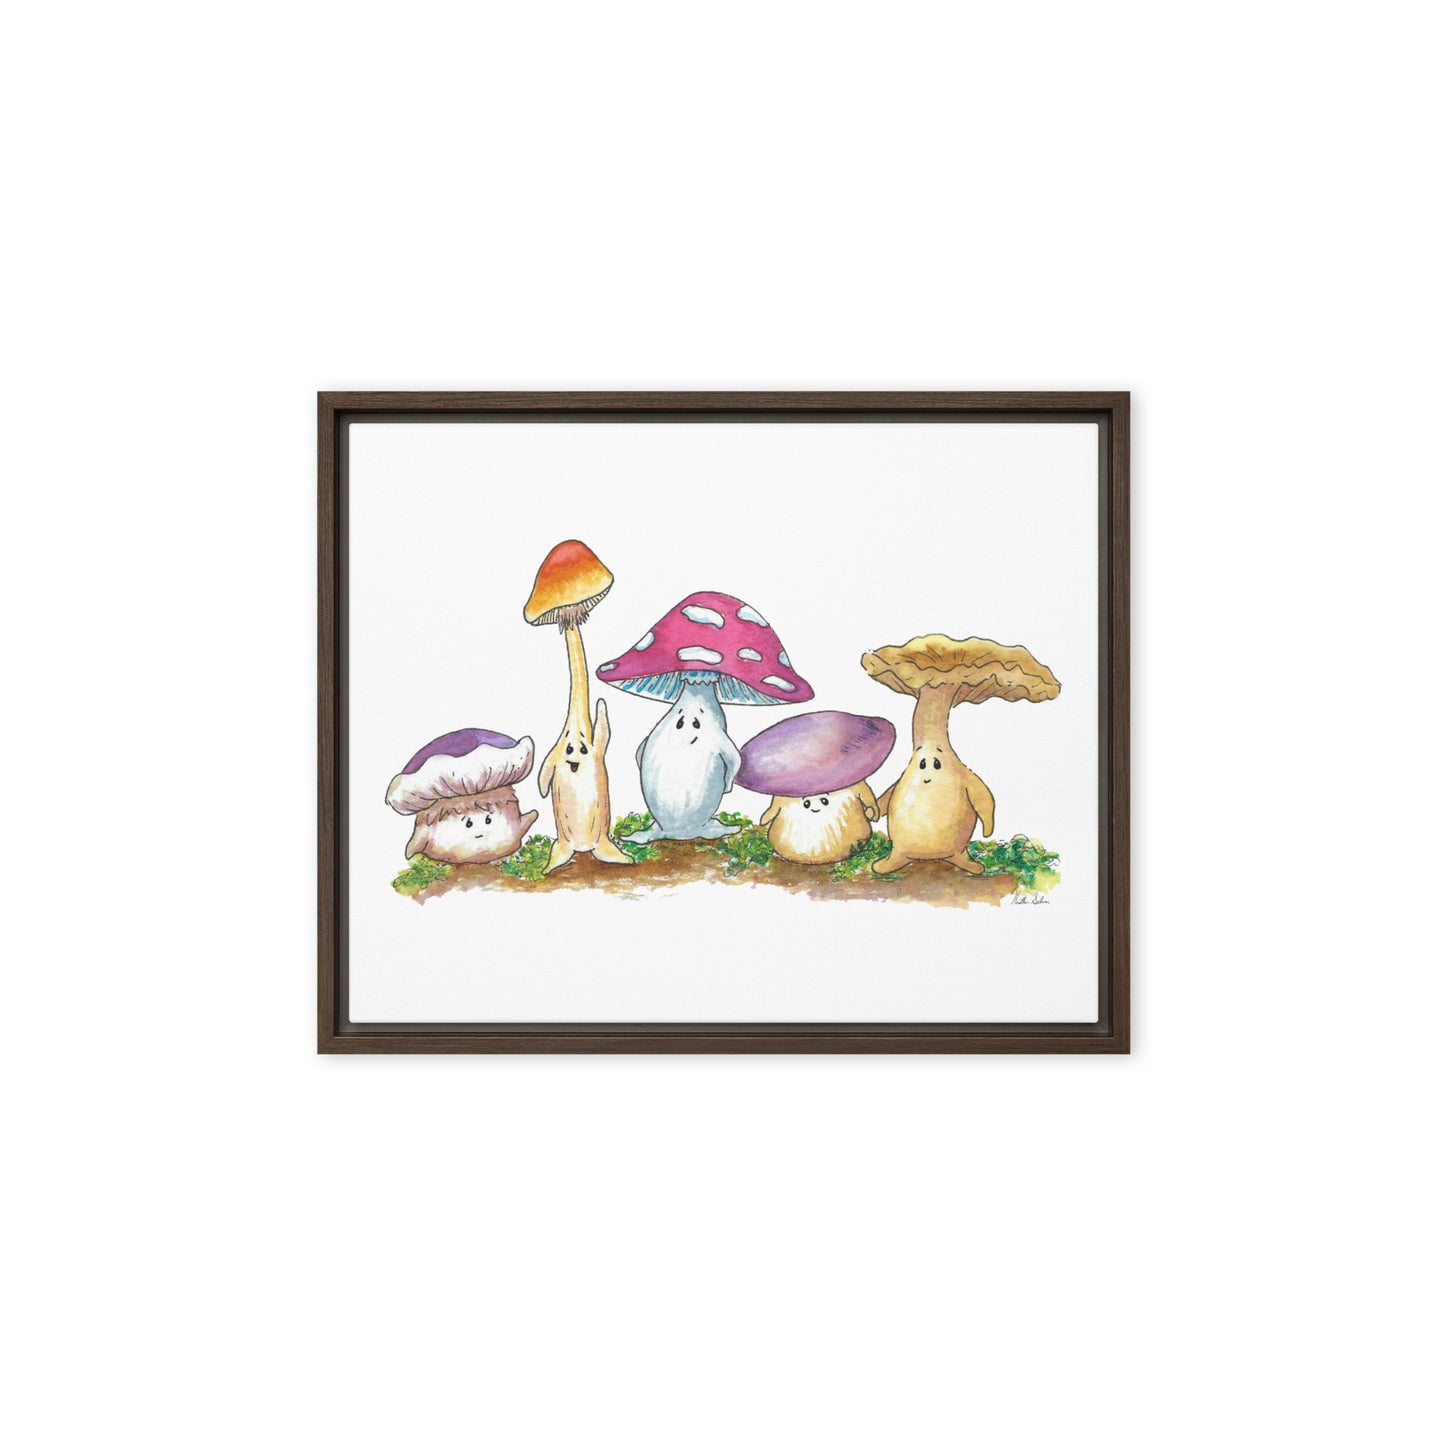 8 by 10 inch canvas print of Heather Silver's watercolor painting, Mushy and Friends. Framed in a dark brown pine wood frame that gives it a floating canvas effect.